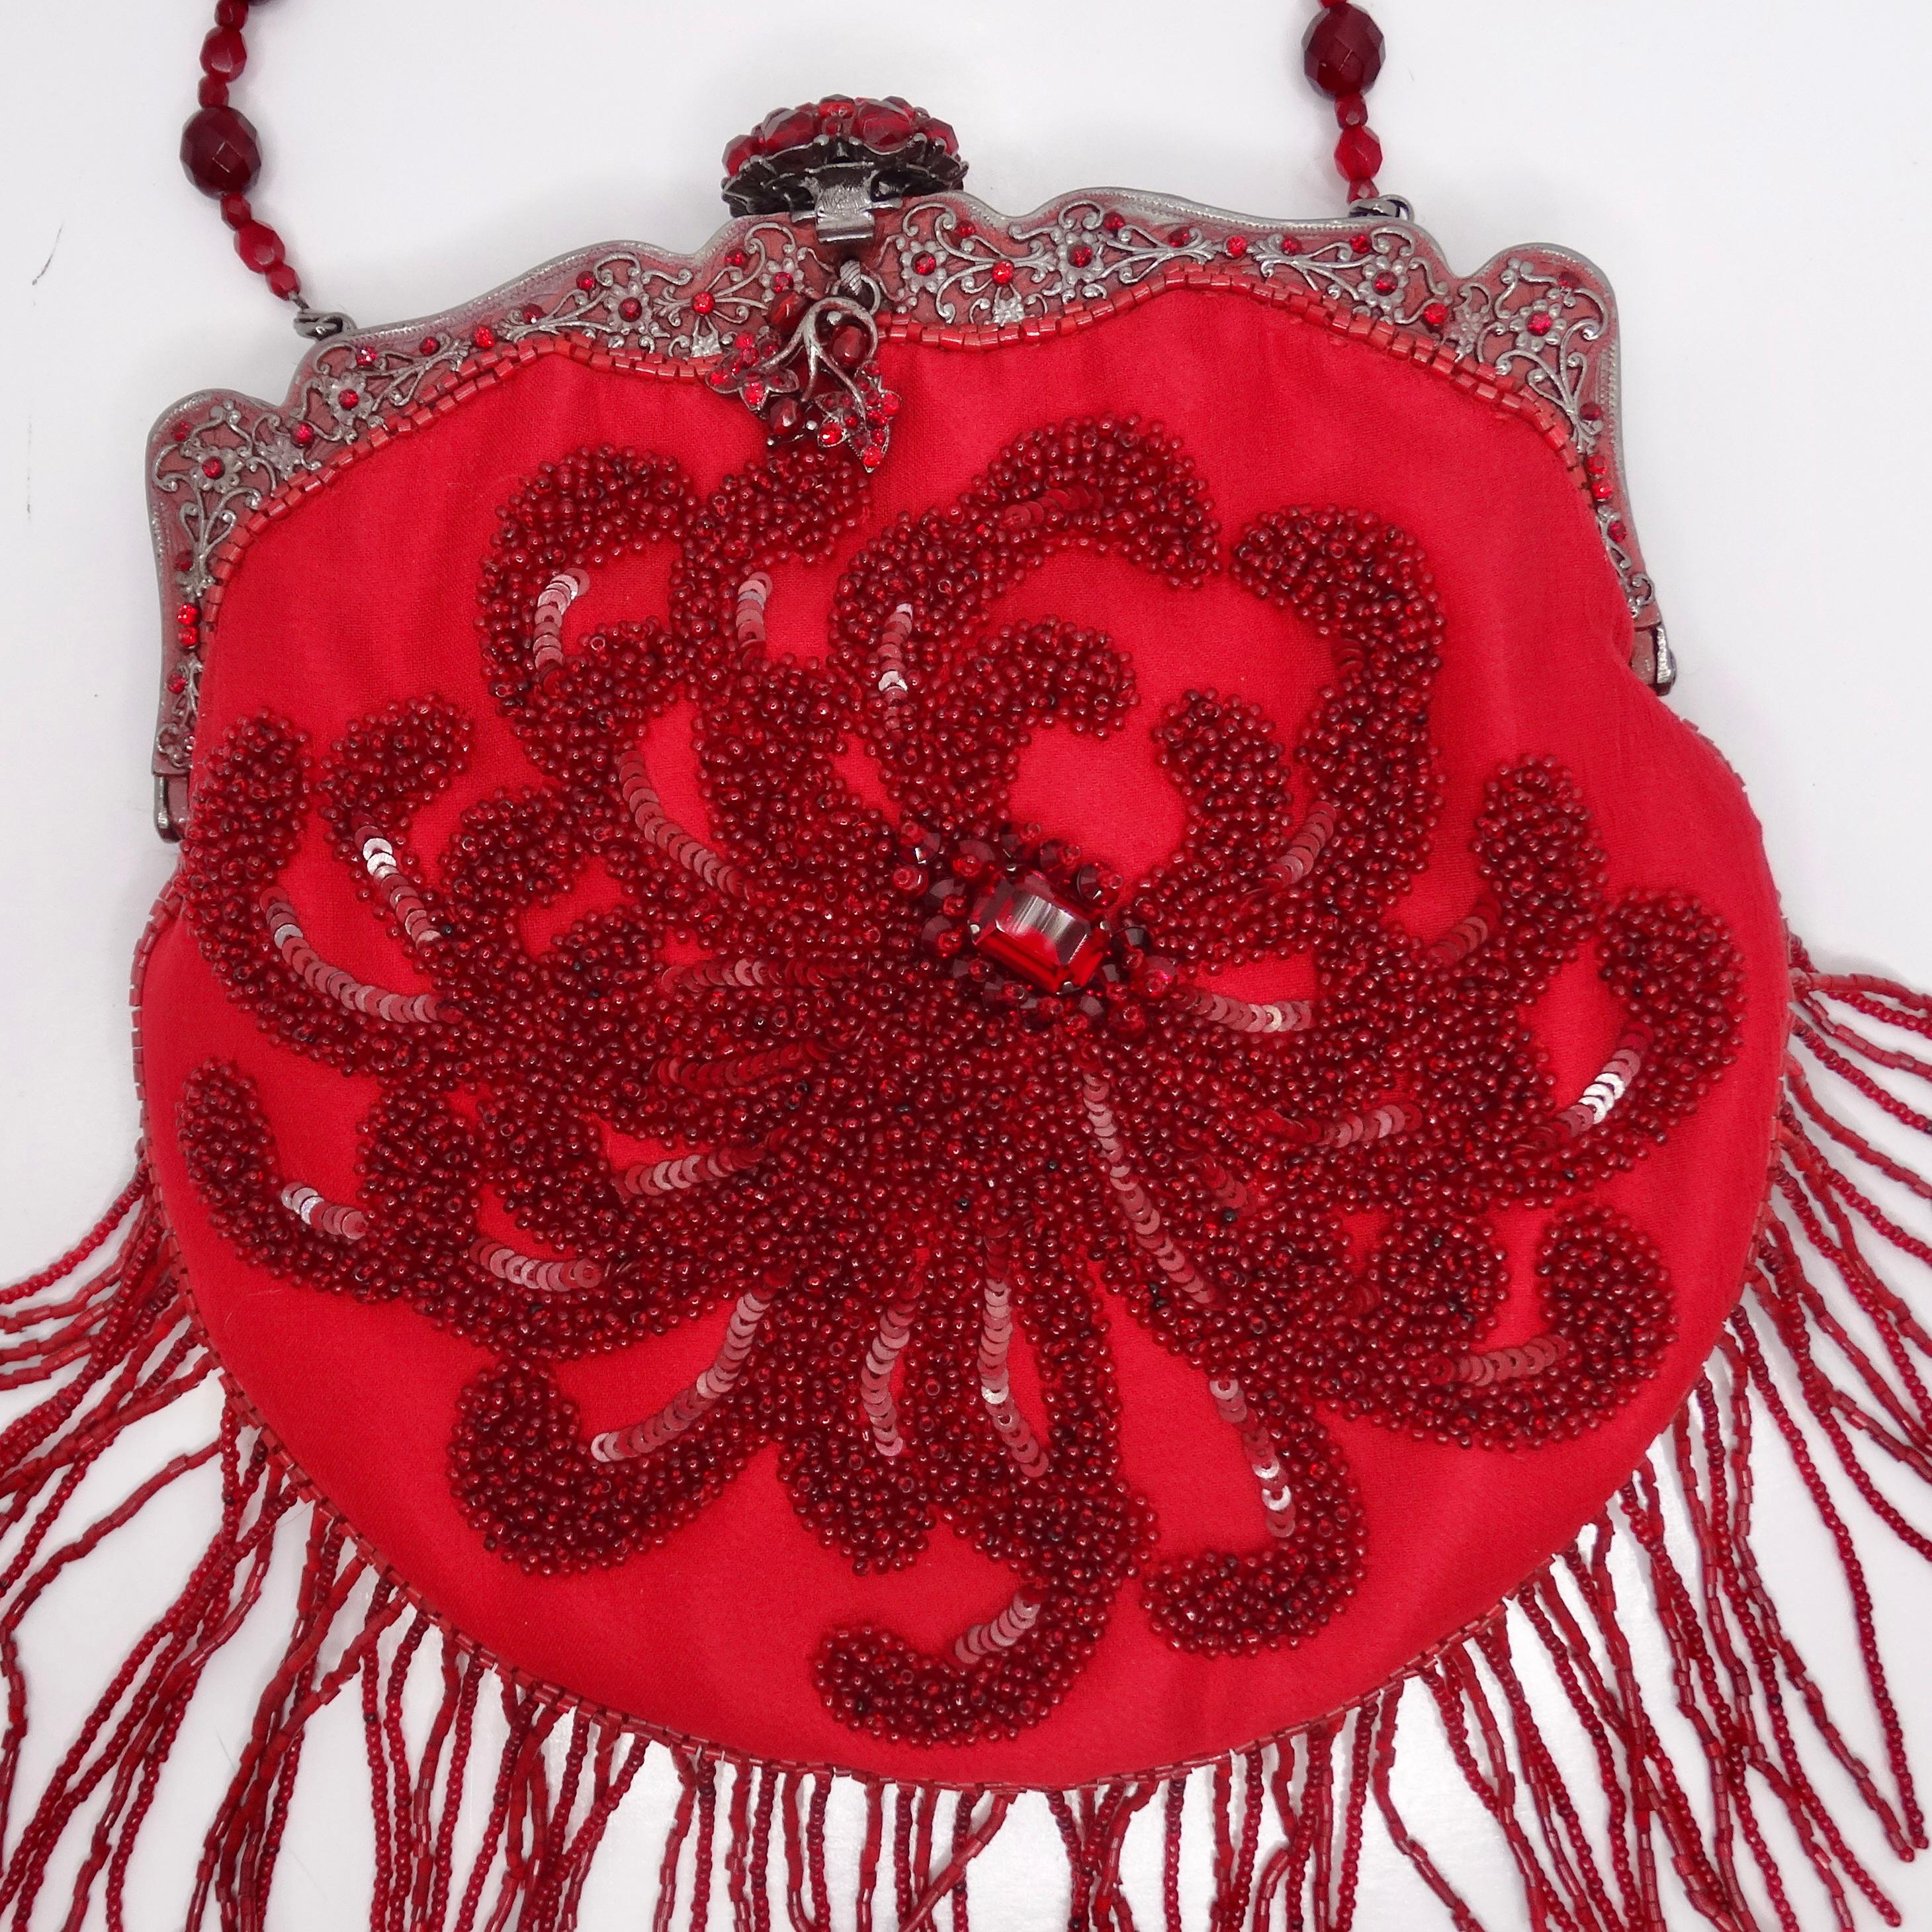 Introducing the Larissa Barrera Red Embellished Evening Bag, a stunning and unique accessory that exudes elegance and charm. This eye-catching evening bag features exquisite details that elevate its beauty to new heights.

Crafted in a vibrant red